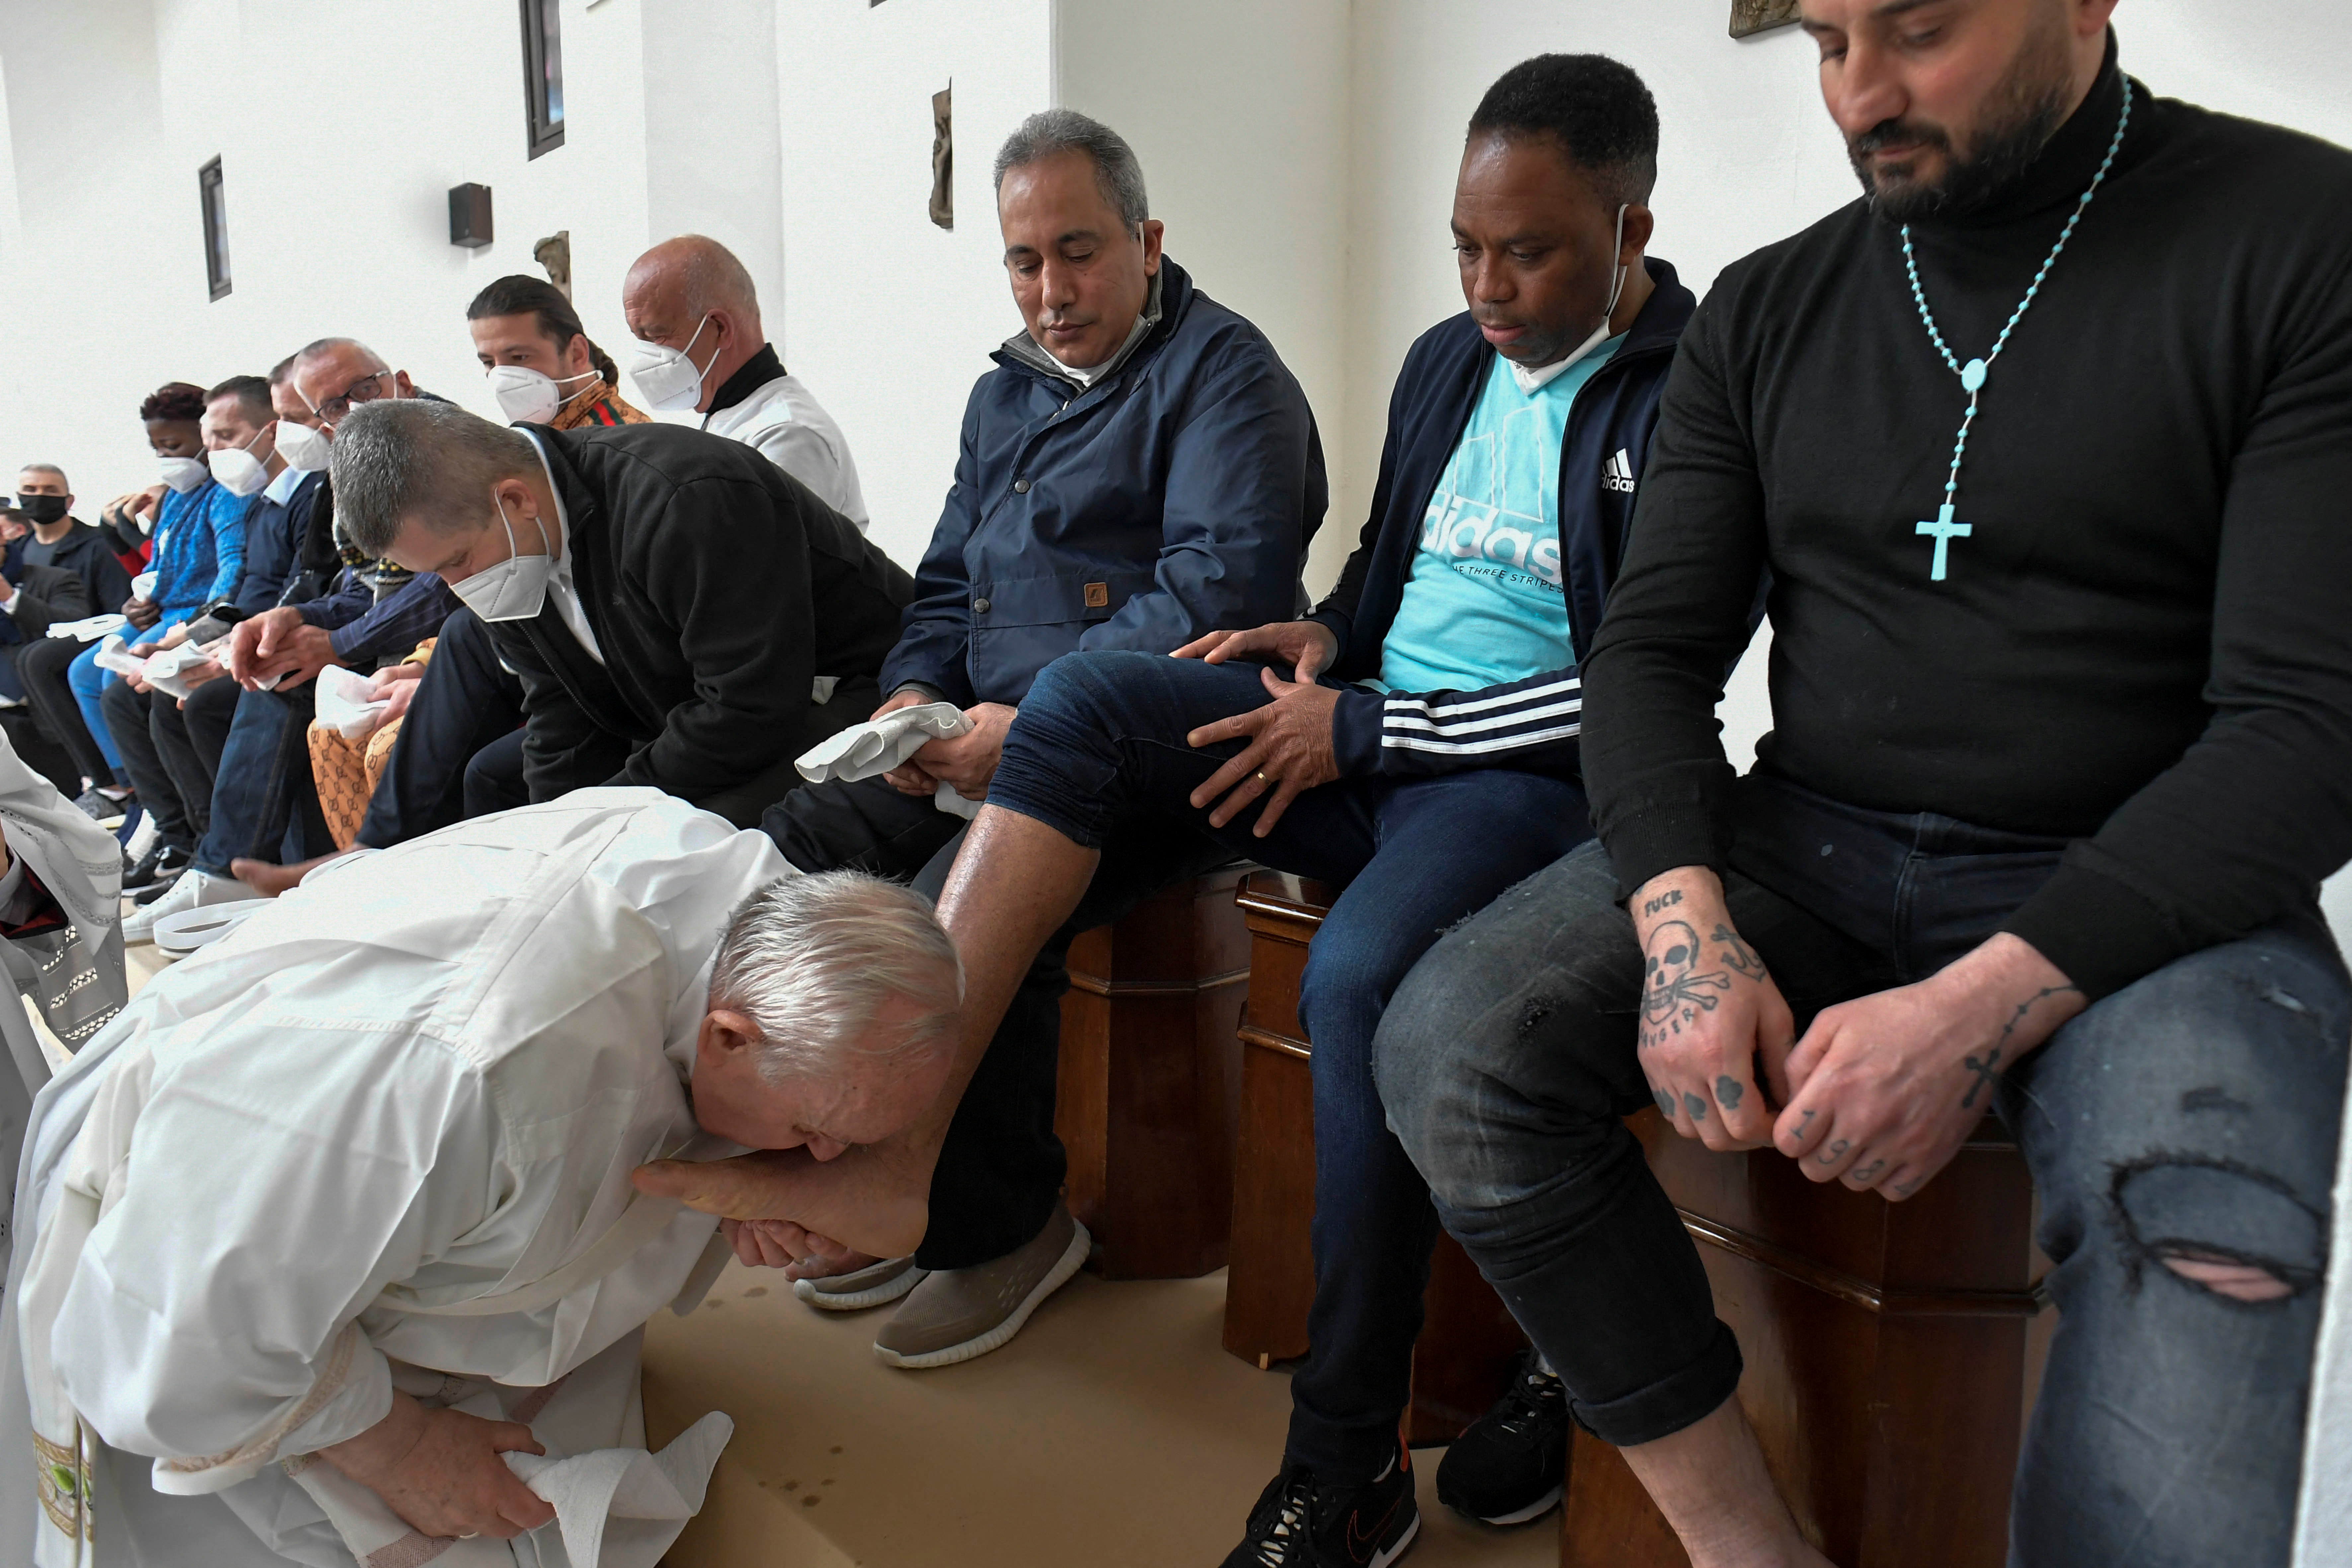 Pope visits prison at Civitavecchia and washes the feet of twelve inmates in traditional Easter ritual